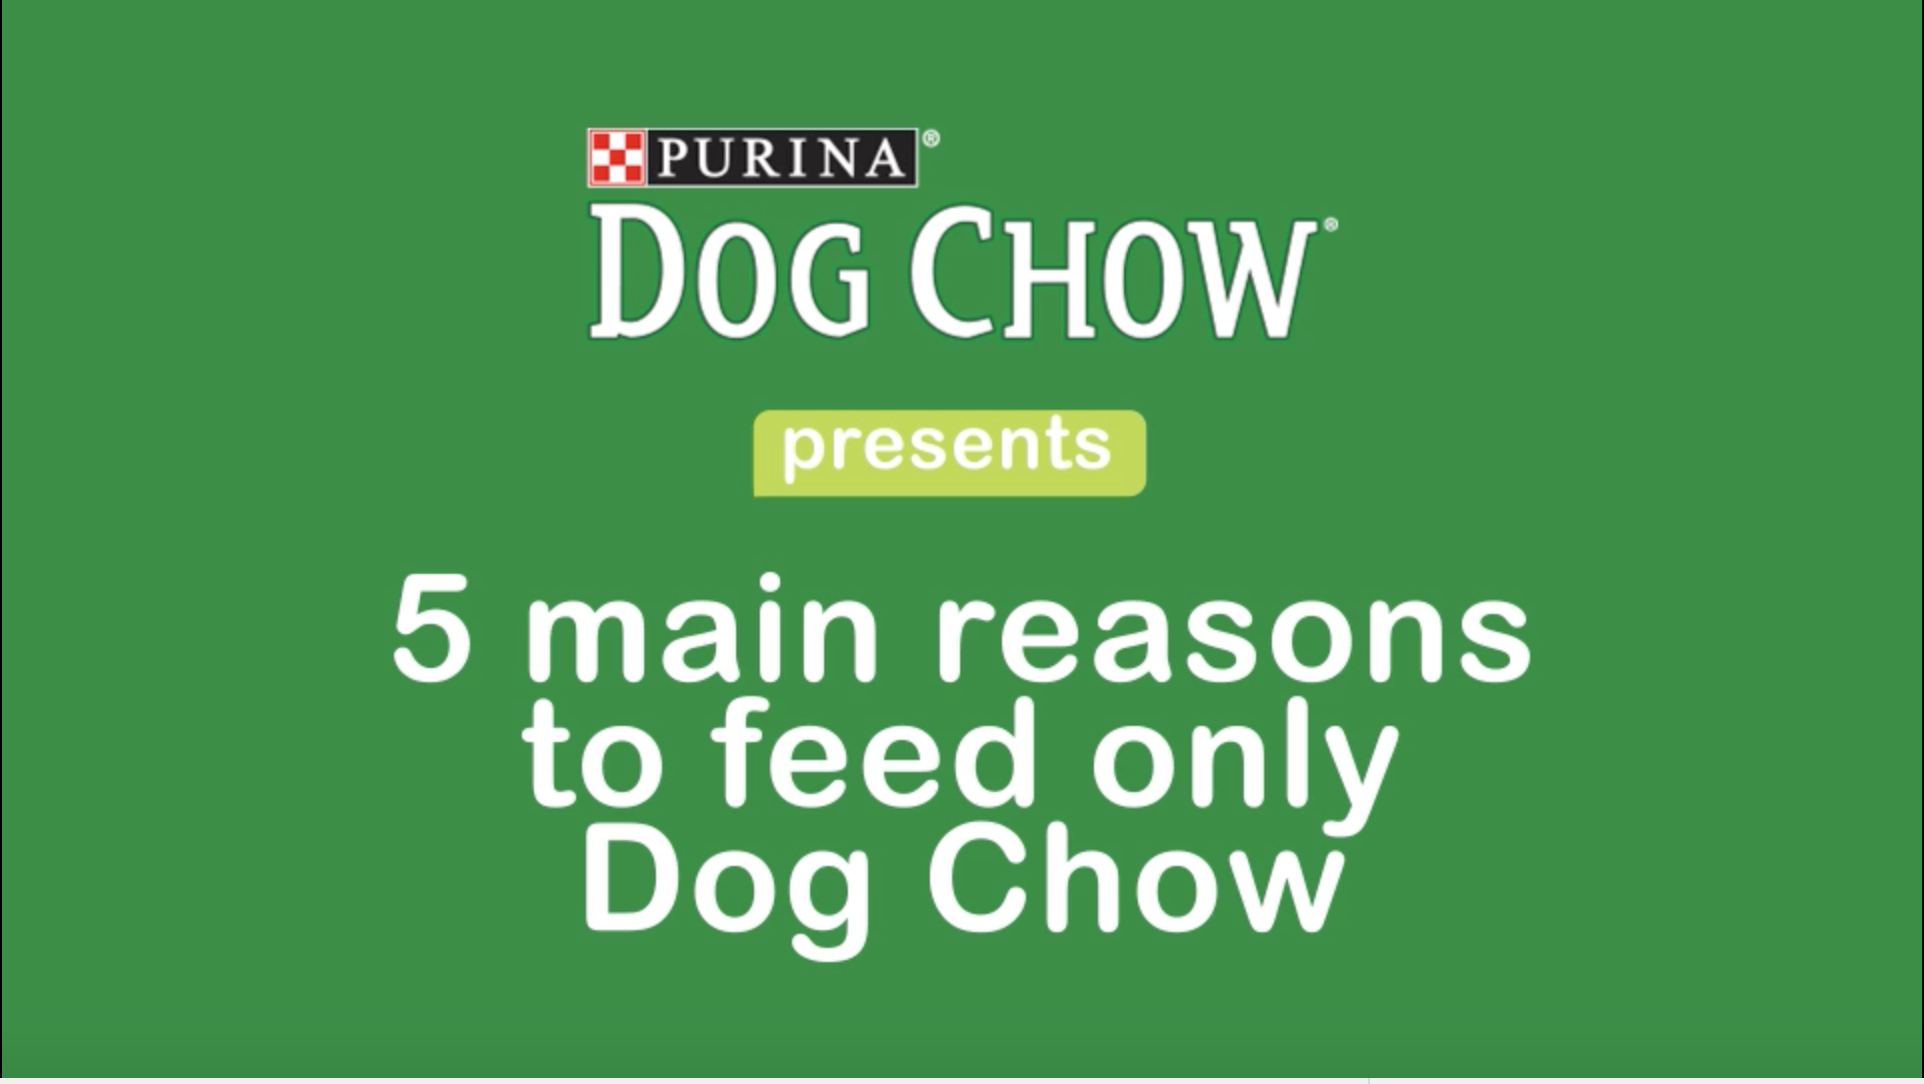 Purina: Explainer Video (5 reasons to feed Dog Chow)